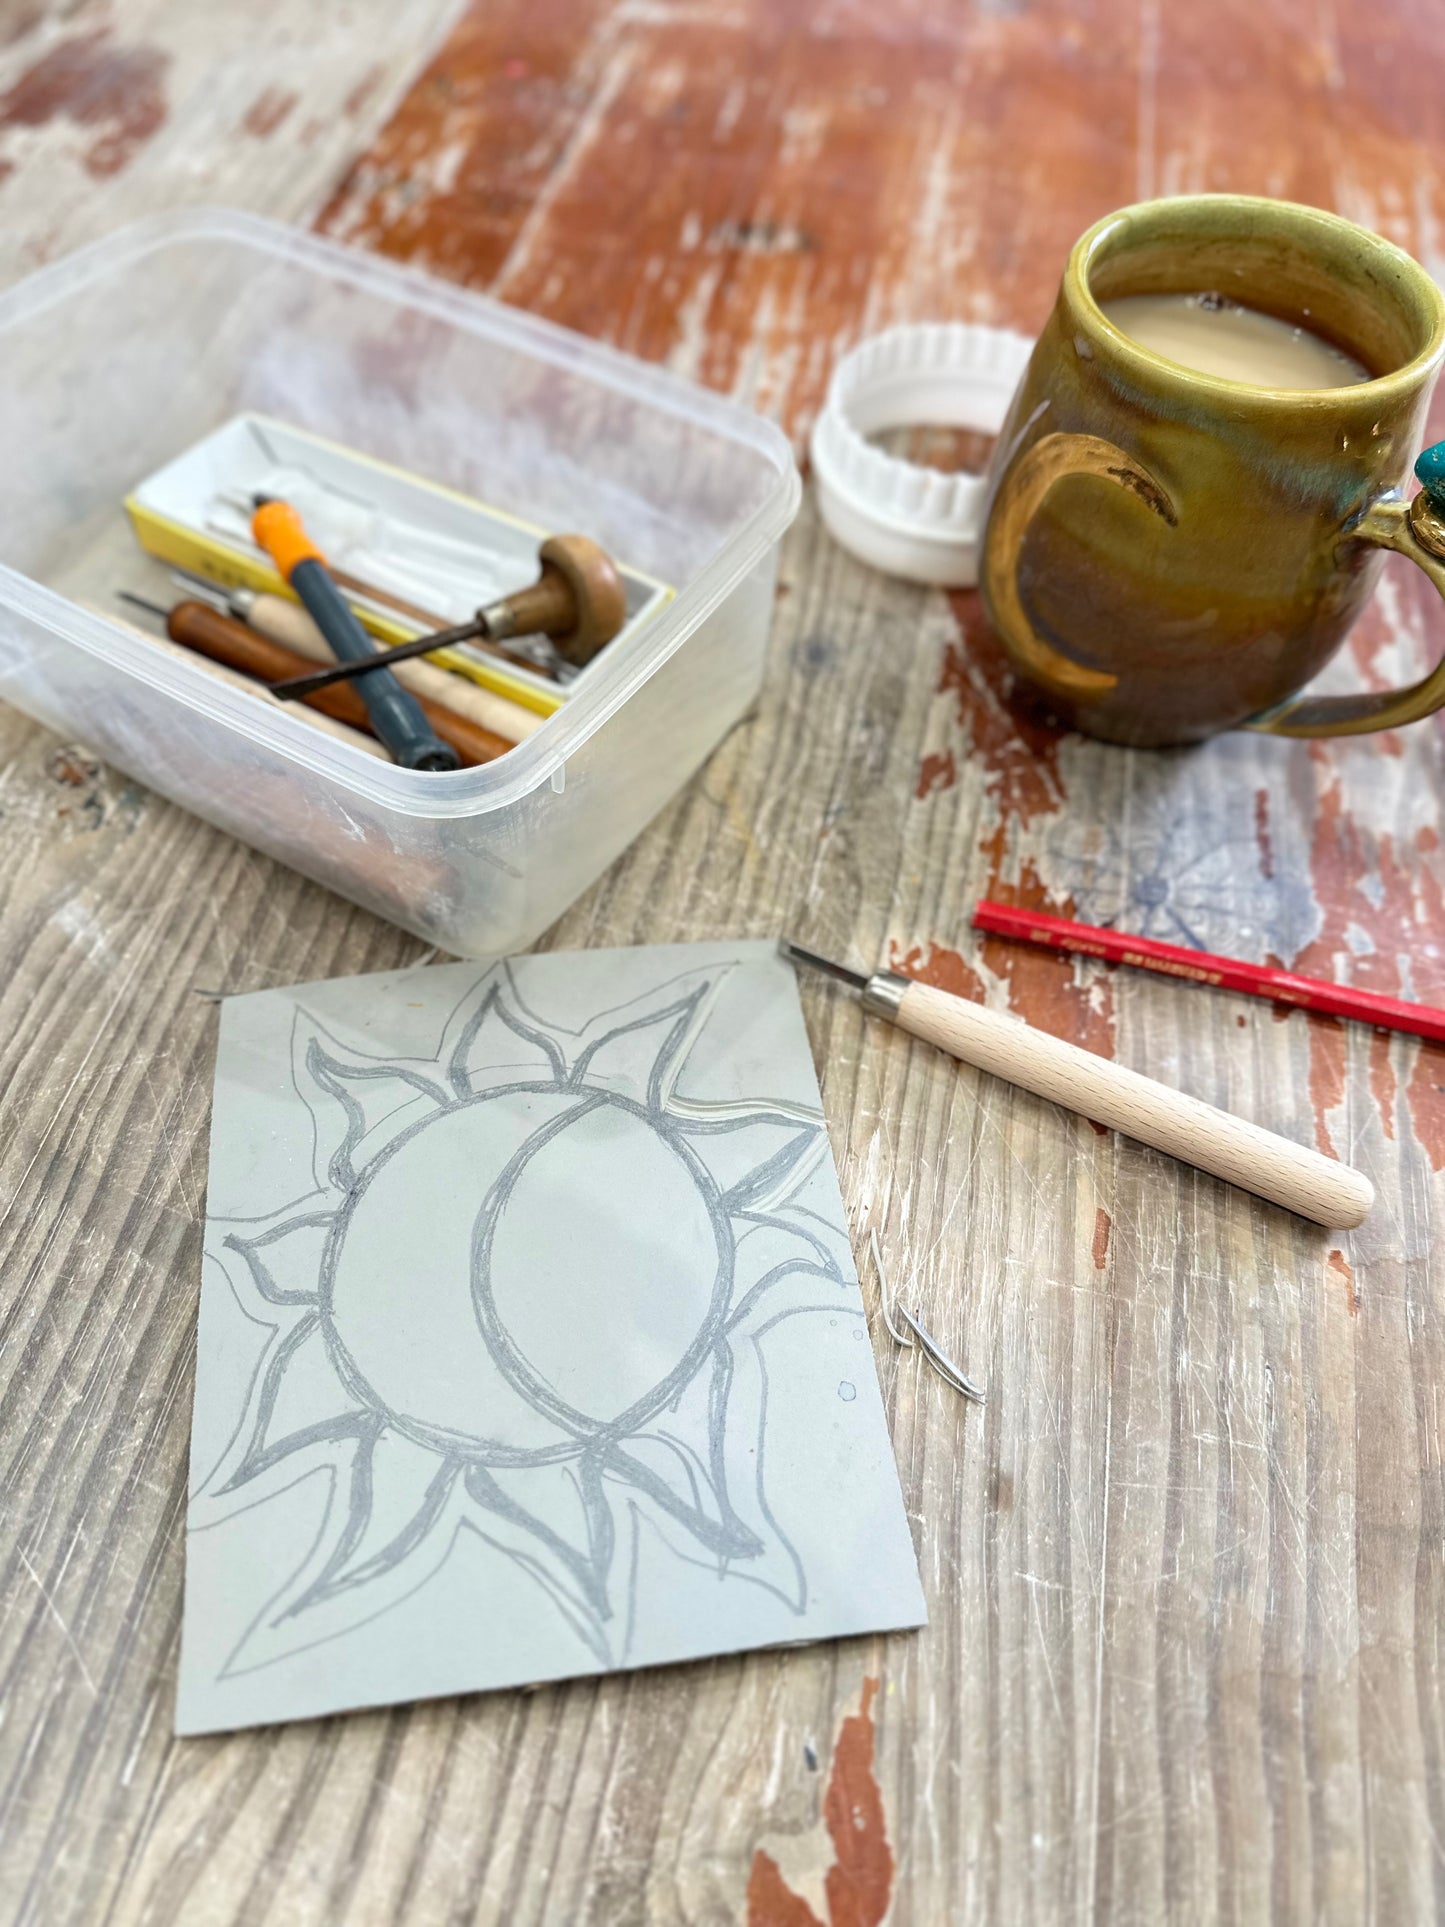 Introductory Printmaking - celestial lino prints. Sunday 2nd June 9:30am - 12